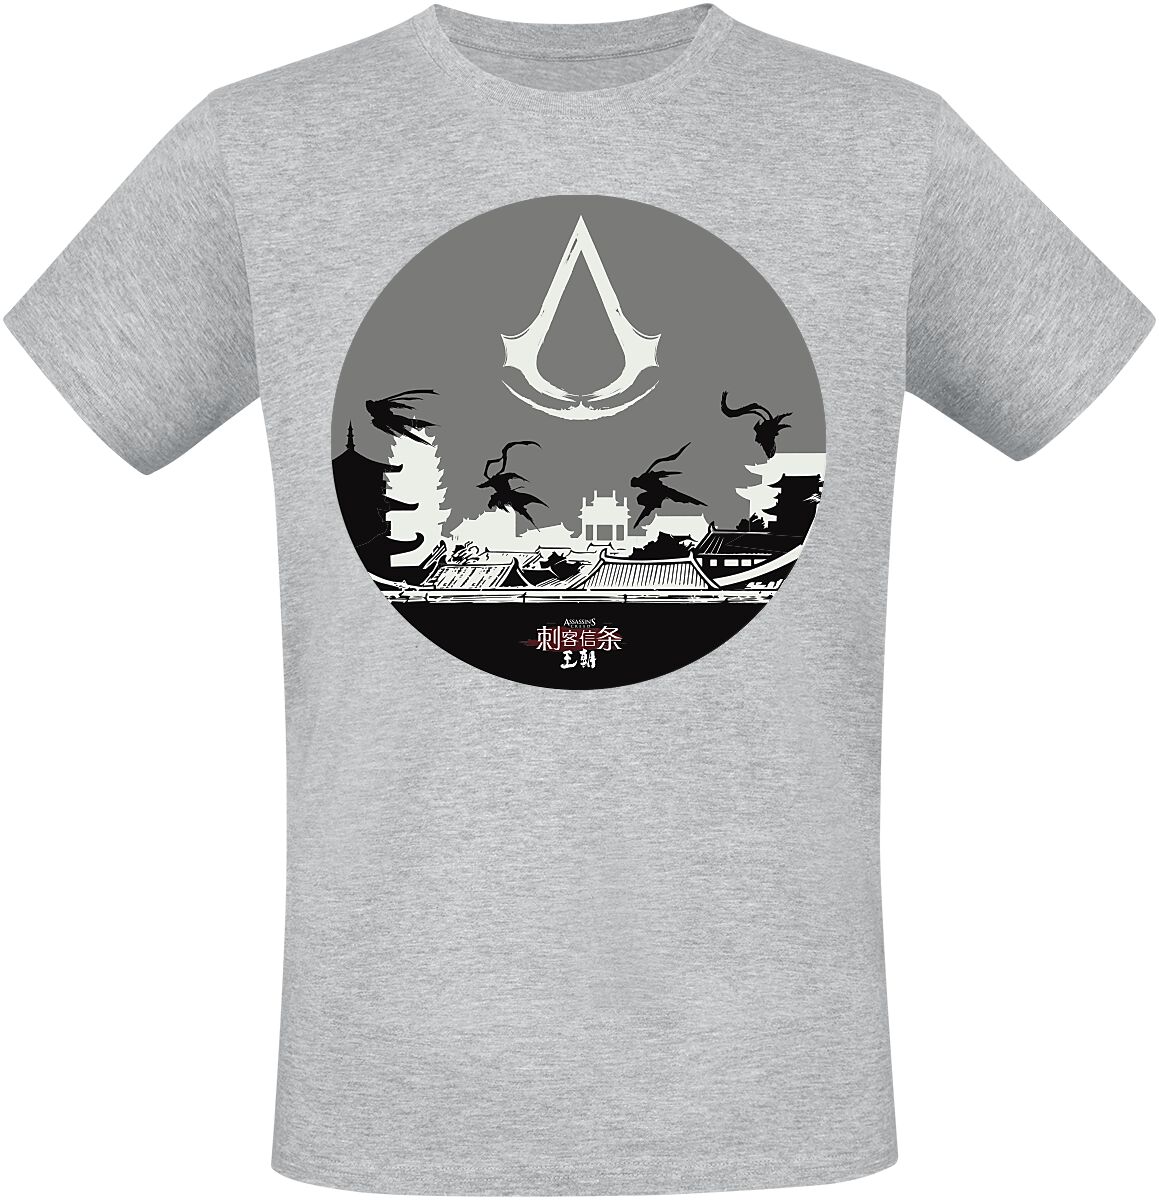 Assassin`s Creed Dynasty - Circle T-Shirt grau meliert in S